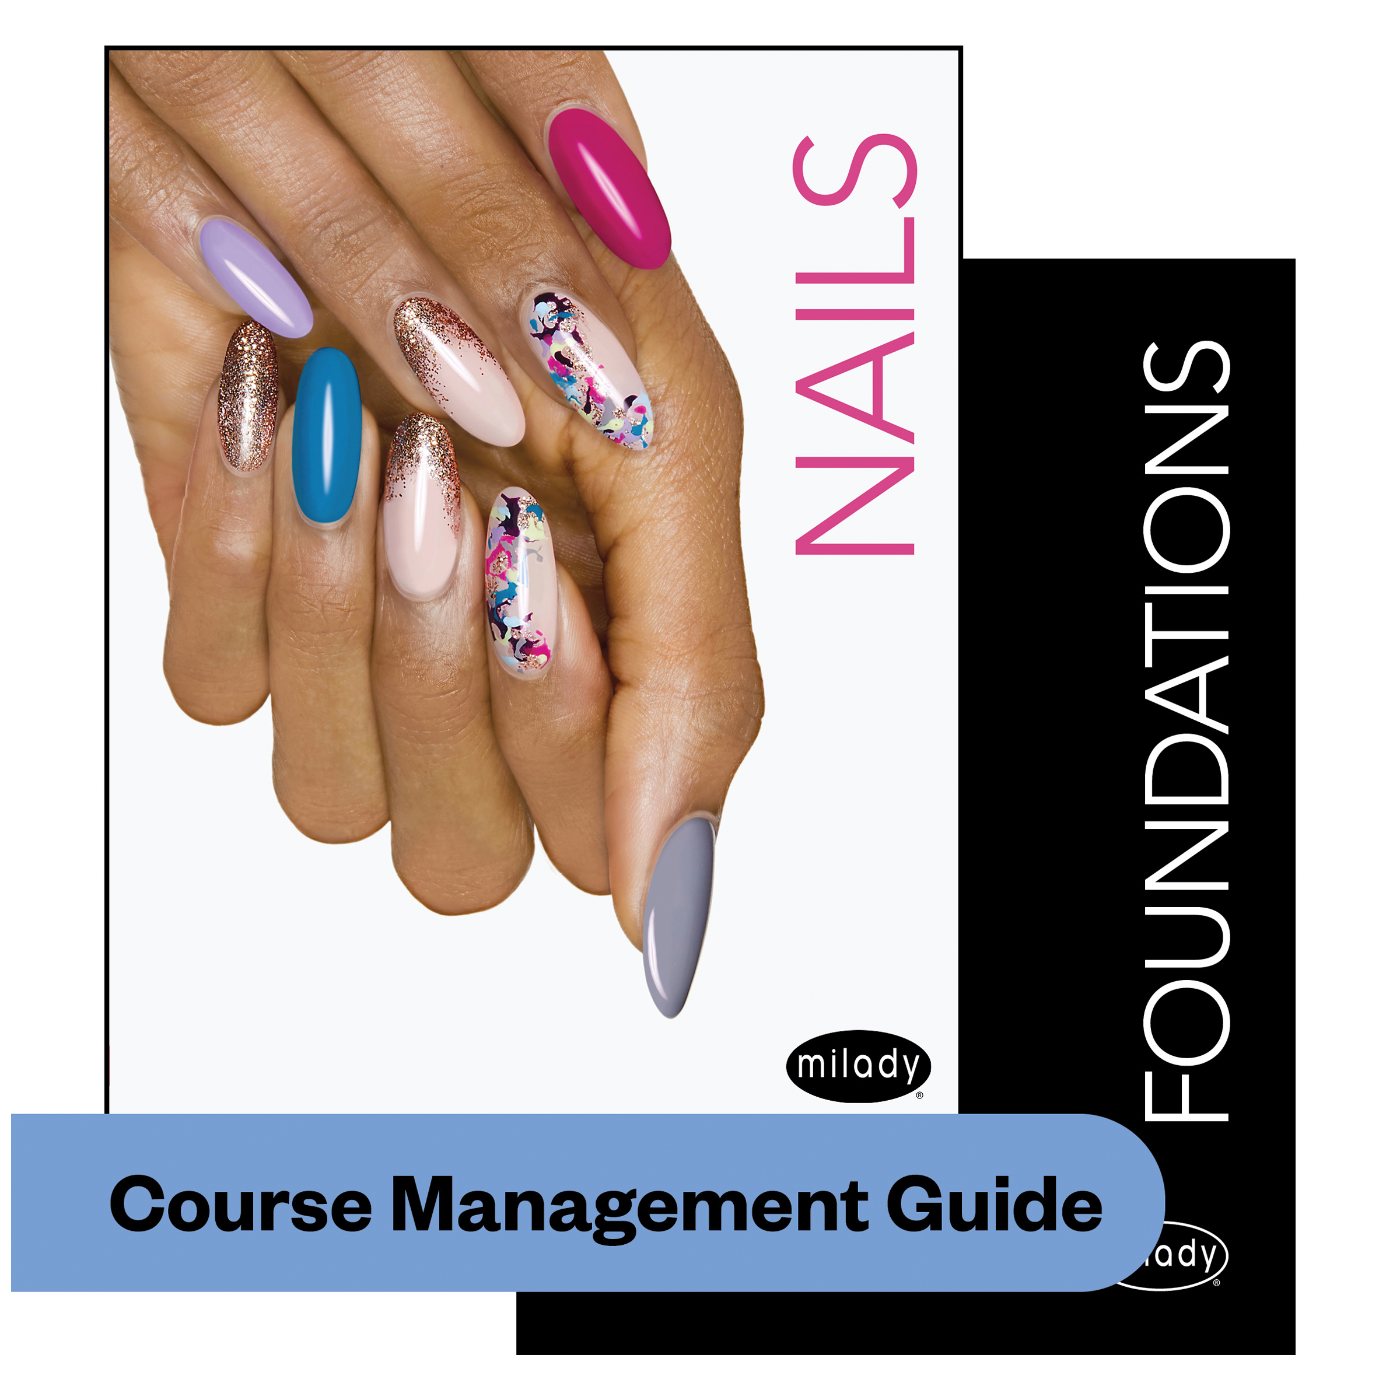 Standard Nail 8E & Foundations Course Management Guide Package on USB